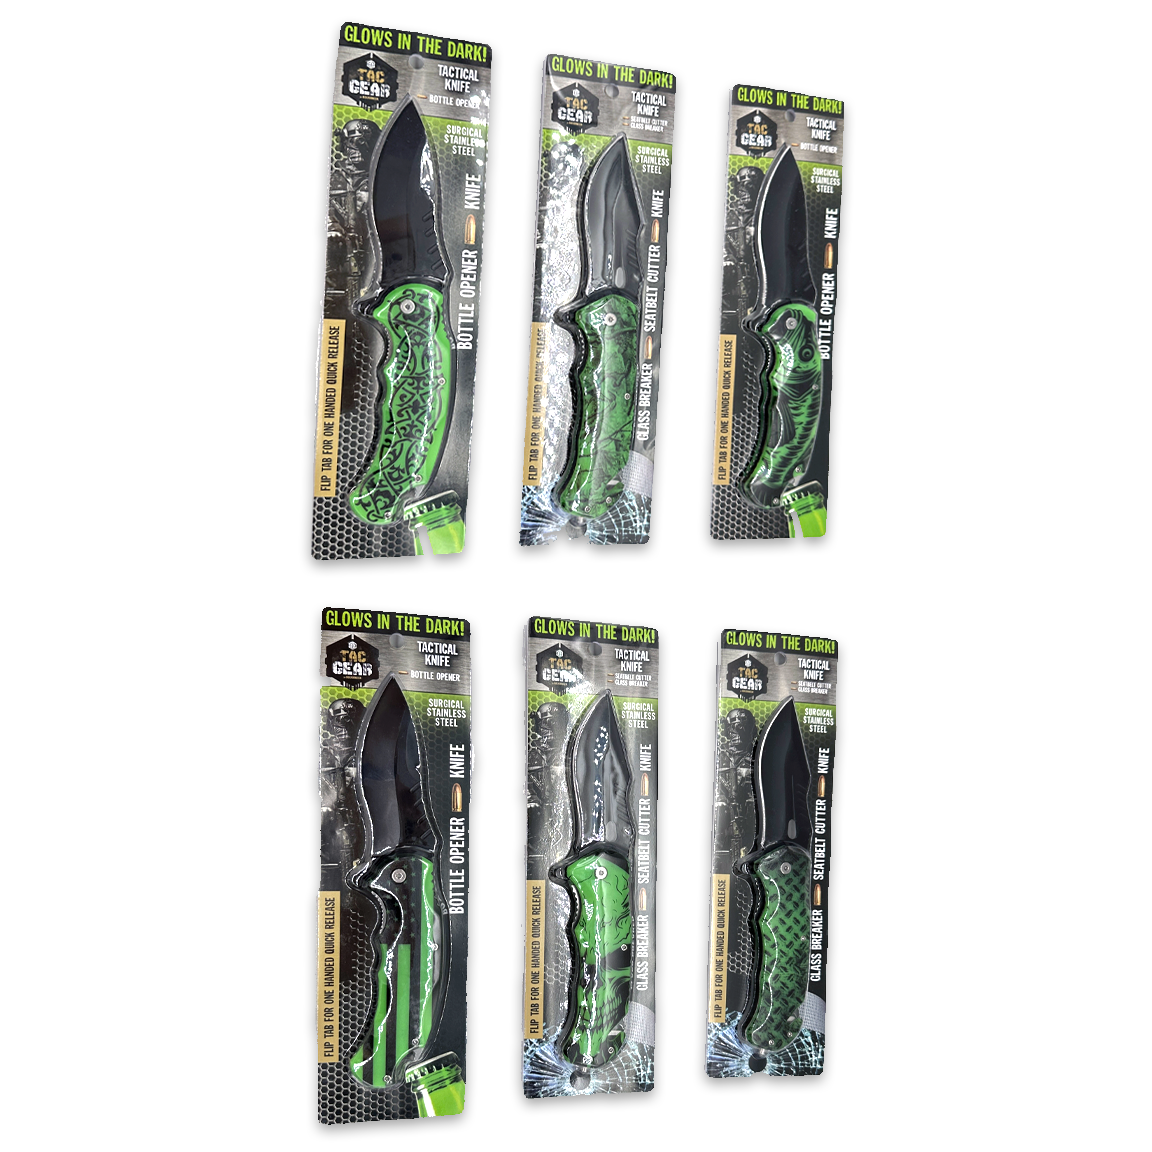 WHOLESALE TAC GEAR KNIFE 6 PIECES PER DISPLAY 24450